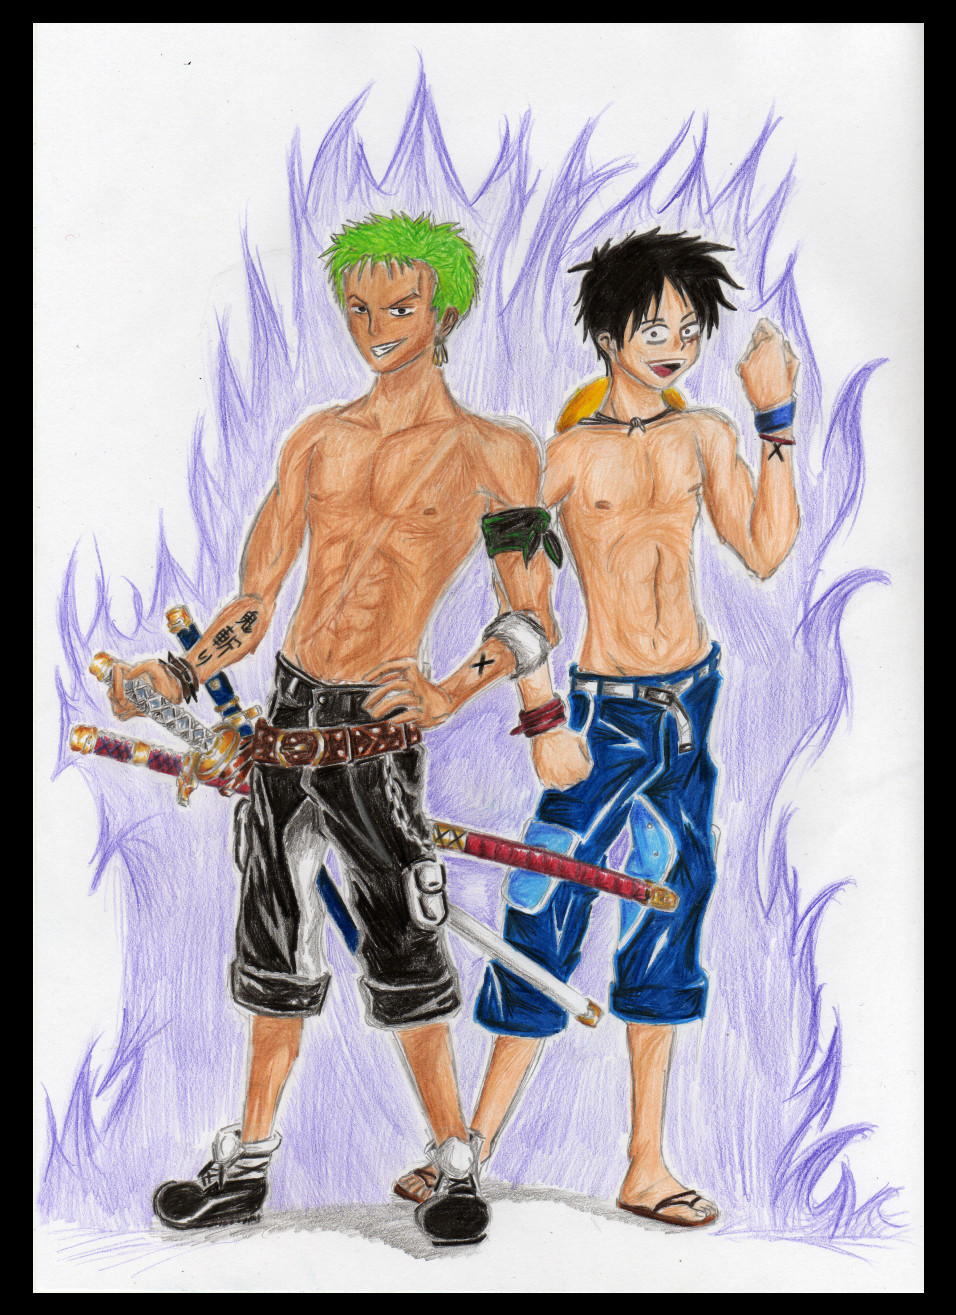 Zoro and Luffy un editited by sword_dragon